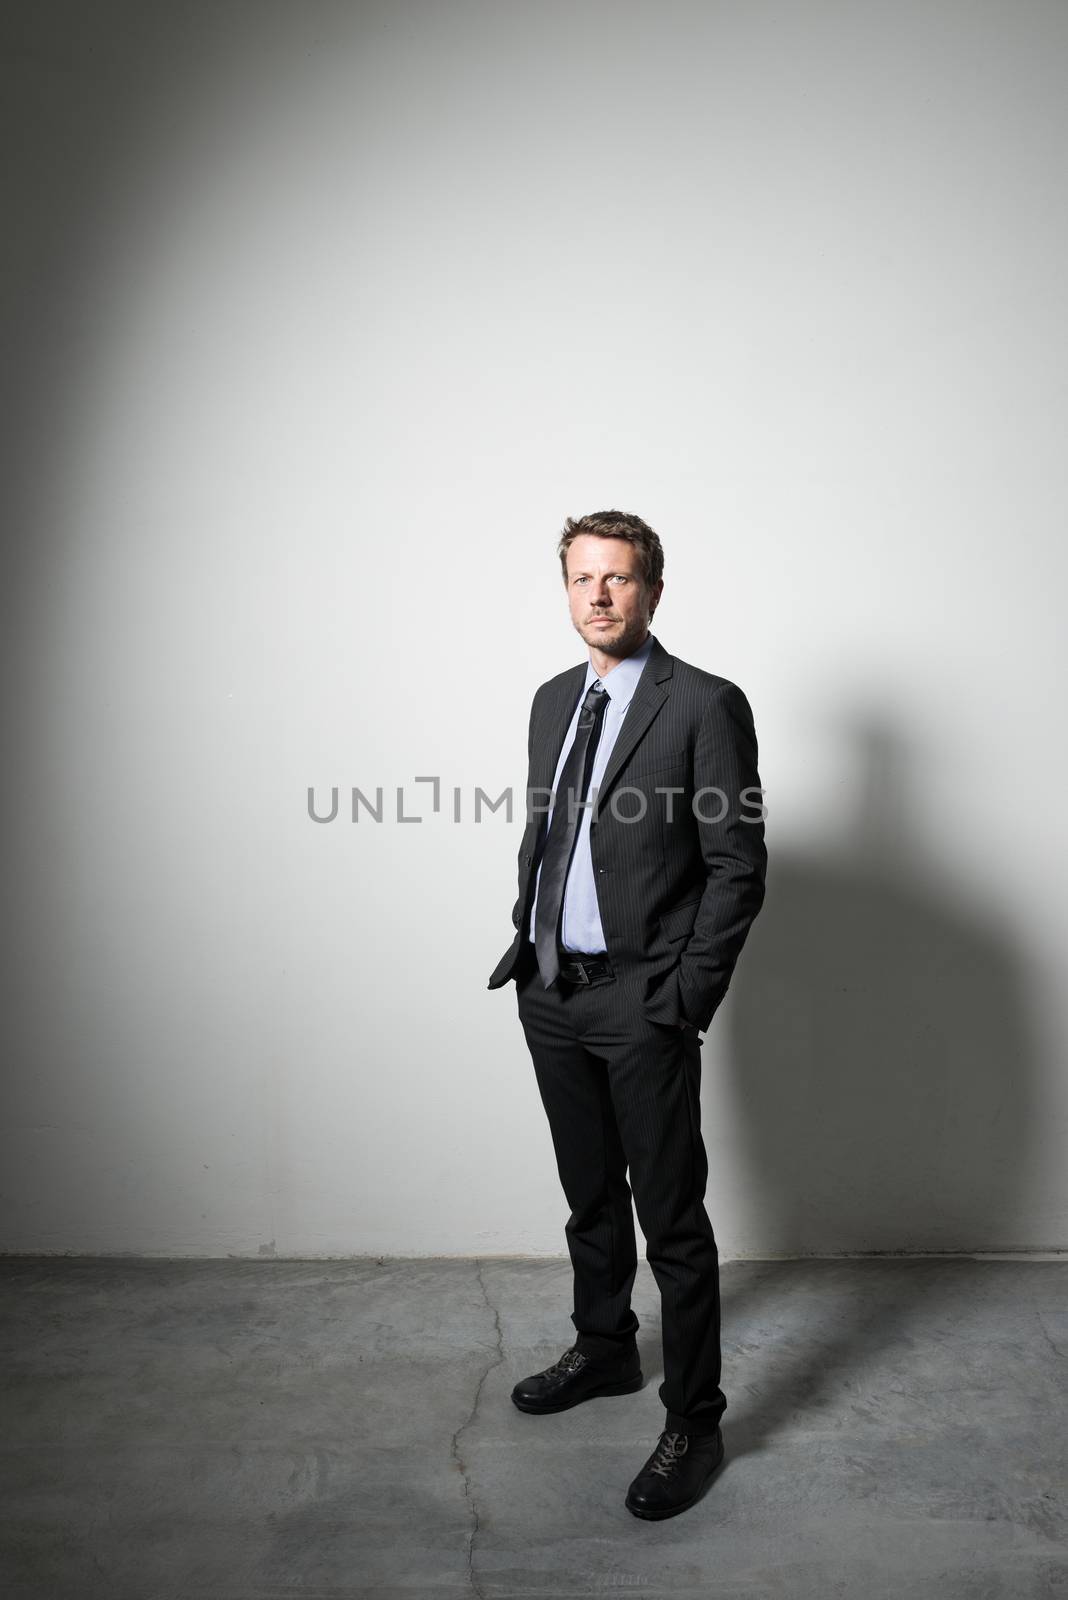 Confident businessman standing with hands in pockets and dramatic lighting.